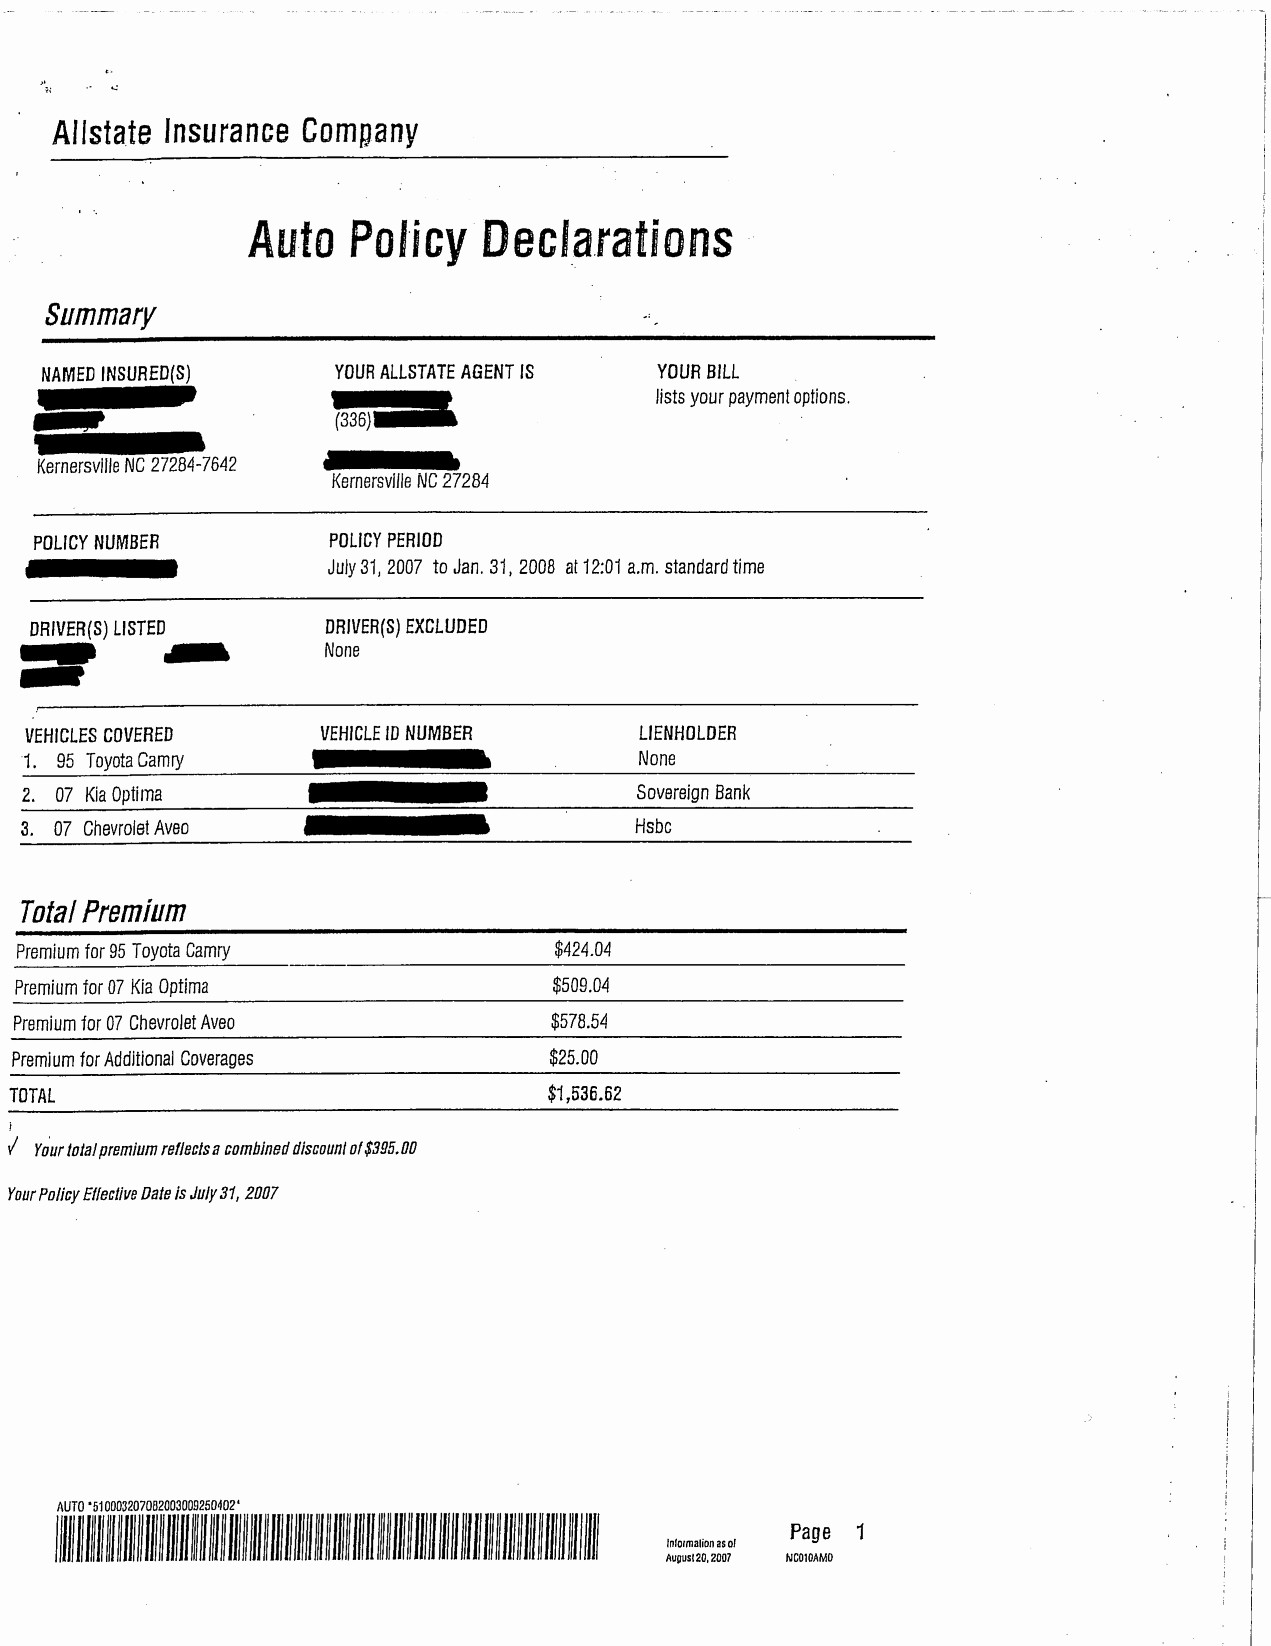 Car Insurance Declaration Page Template Best Of Auto Policy Document Declarations